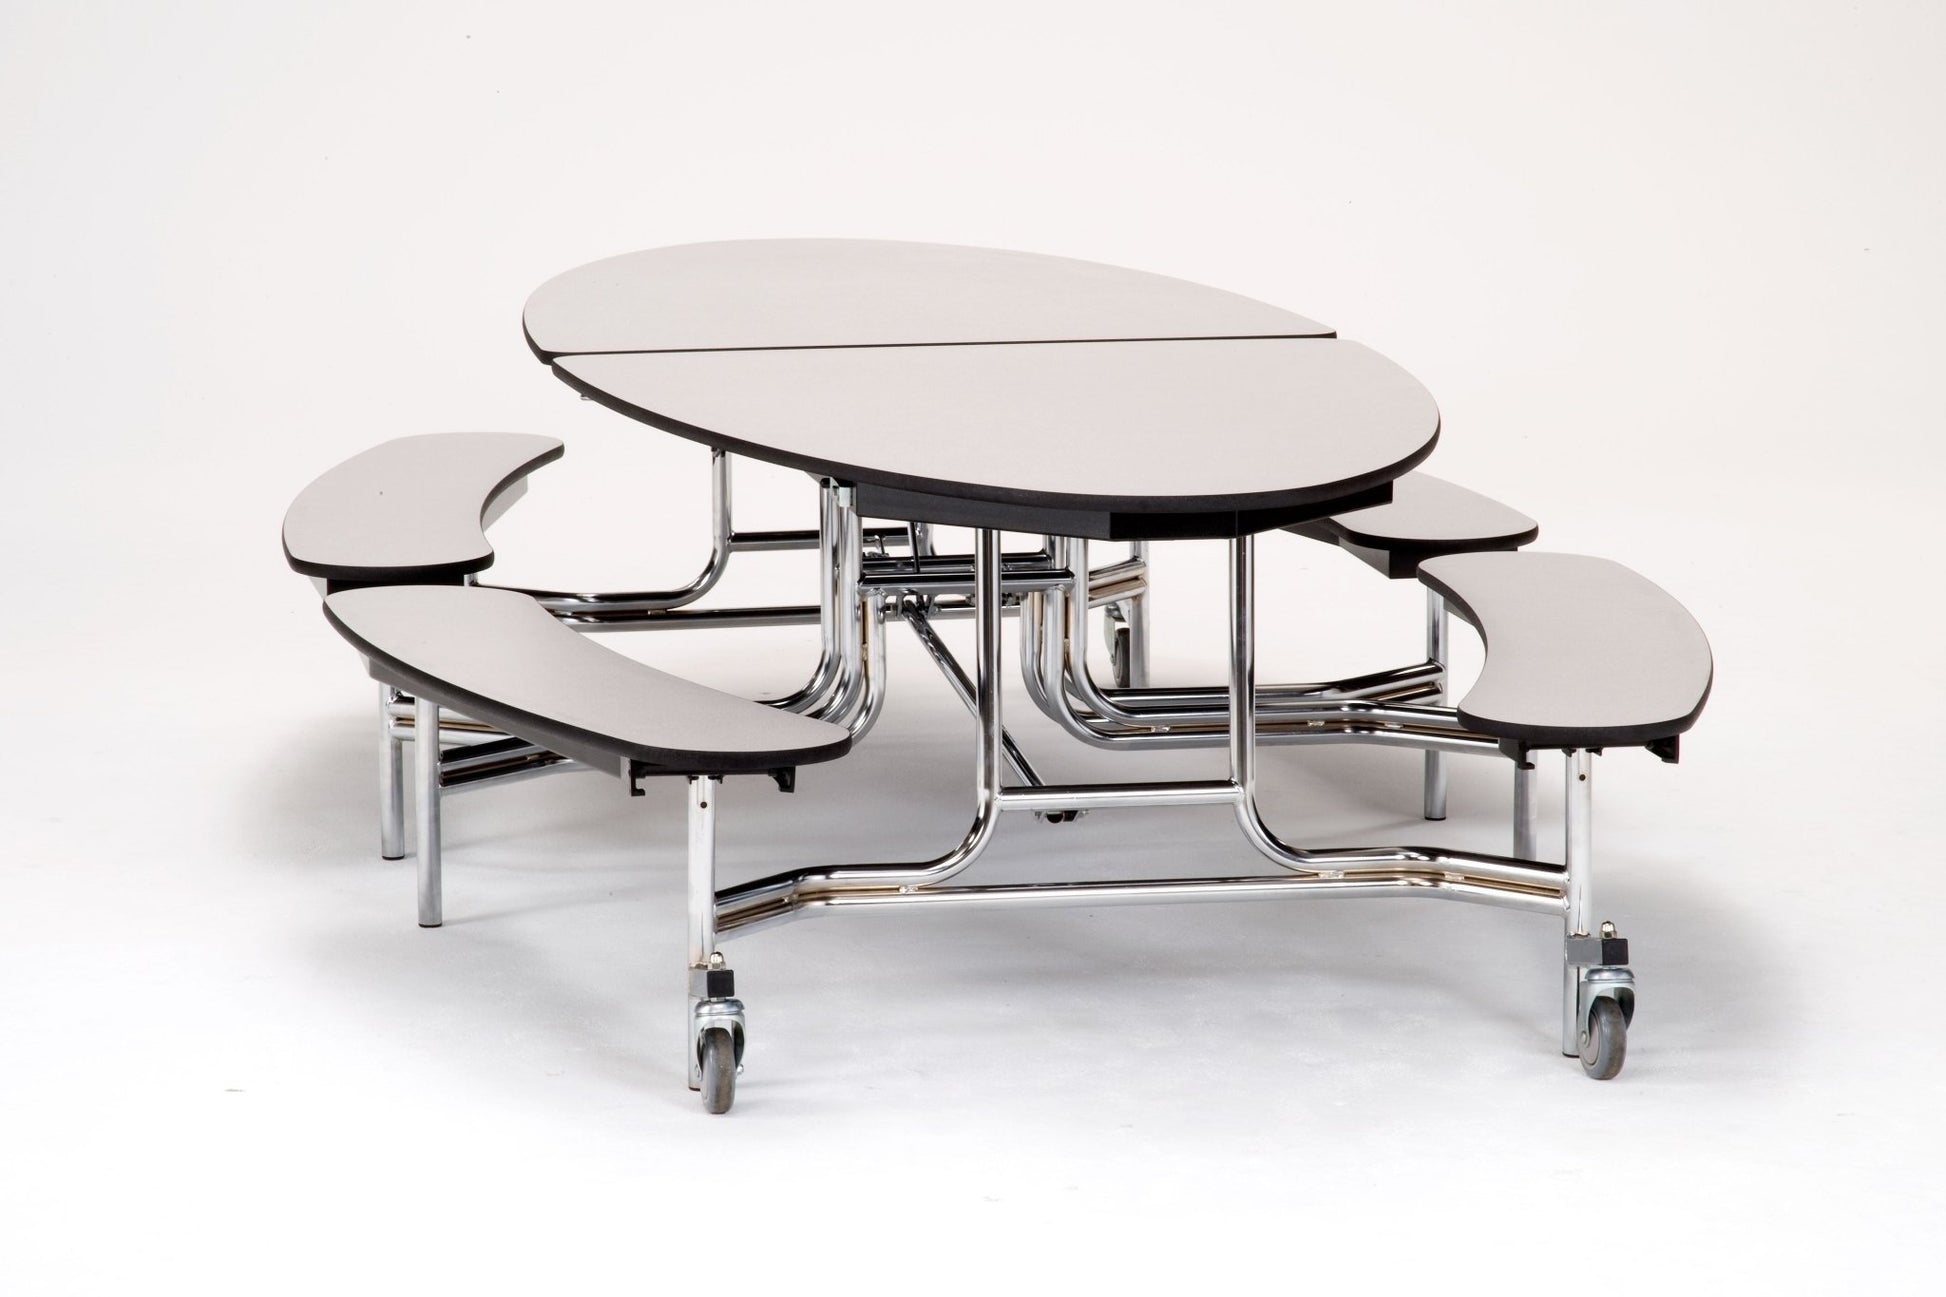 NPS Mobile Cafeteria 10' Elliptical Fixed Bench Unit - Seats 8-12 (National Public Seating NPS-METB) - SchoolOutlet